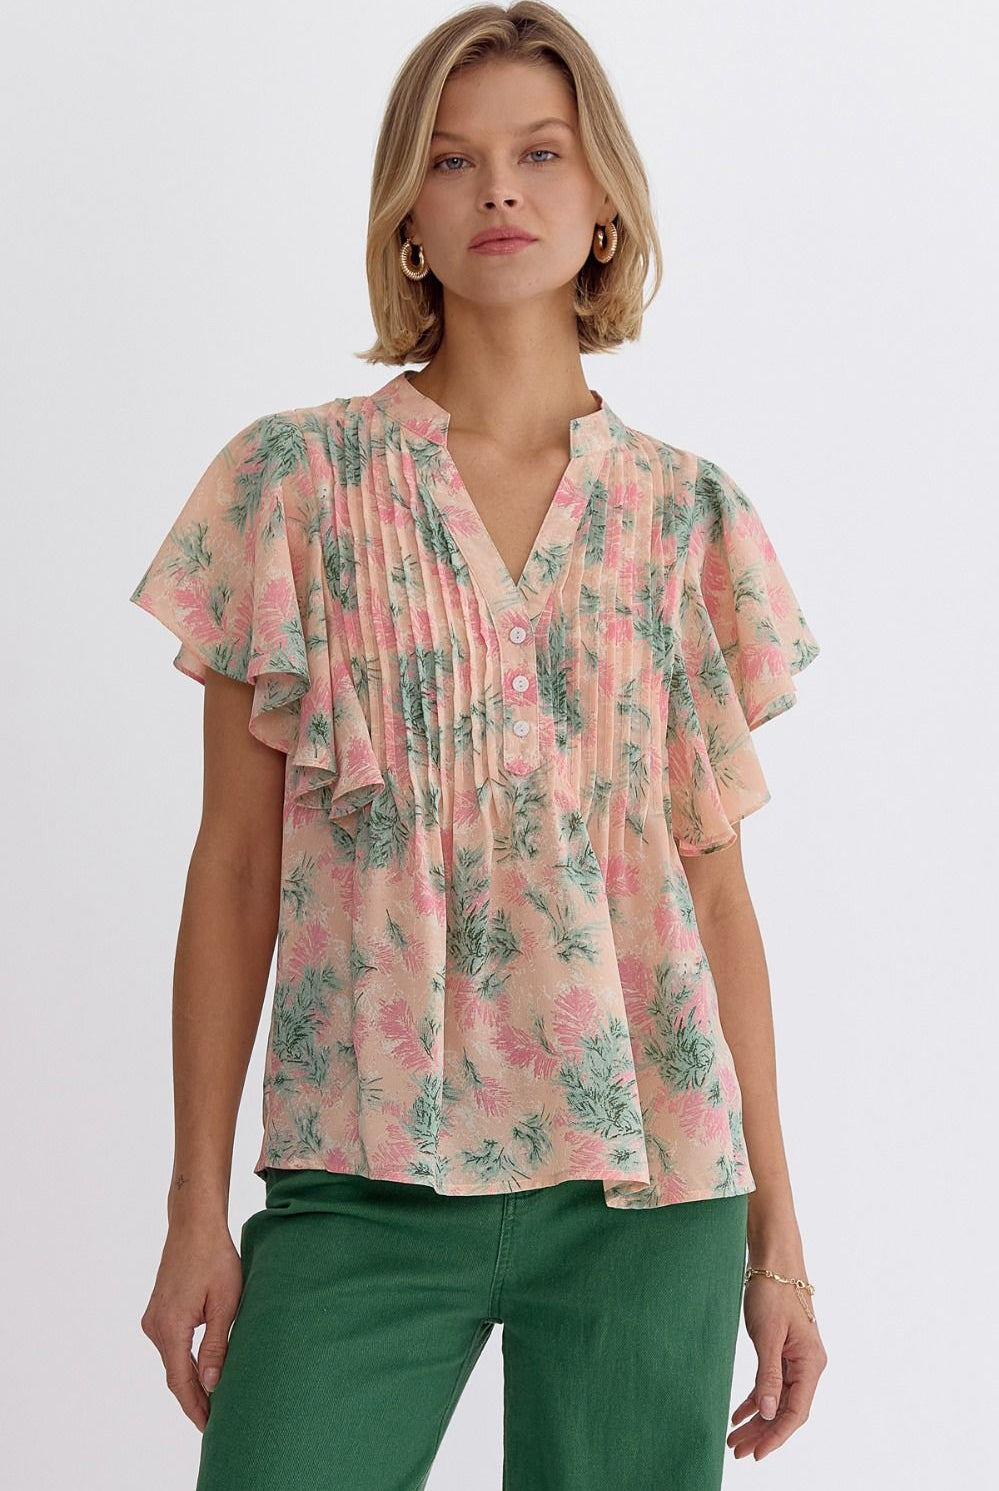 Freddie Floral V Neck Ruffle Detail Blouse Top - Be You Boutique